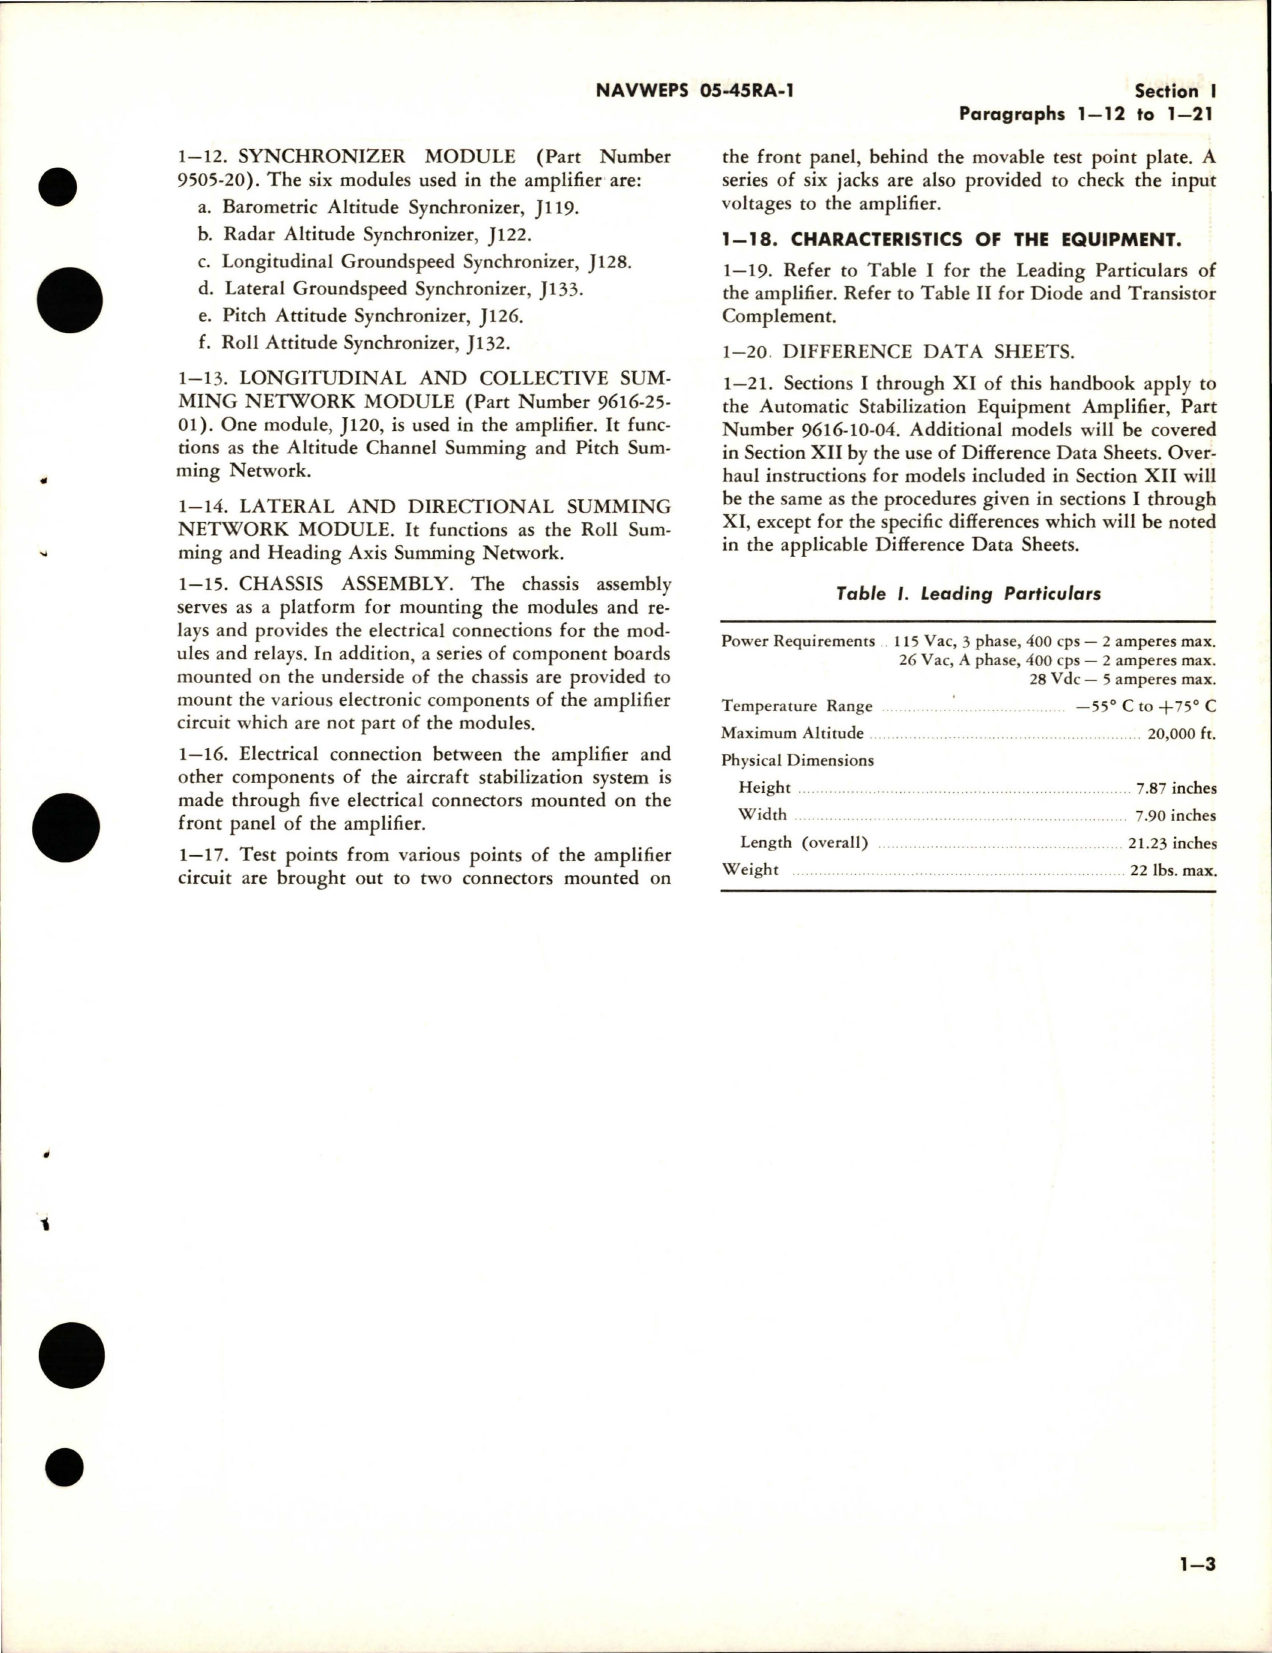 Sample page 9 from AirCorps Library document: Overhaul Instructions for Automatic Stabilization Equipment Amplifier - Part 9616-10-04